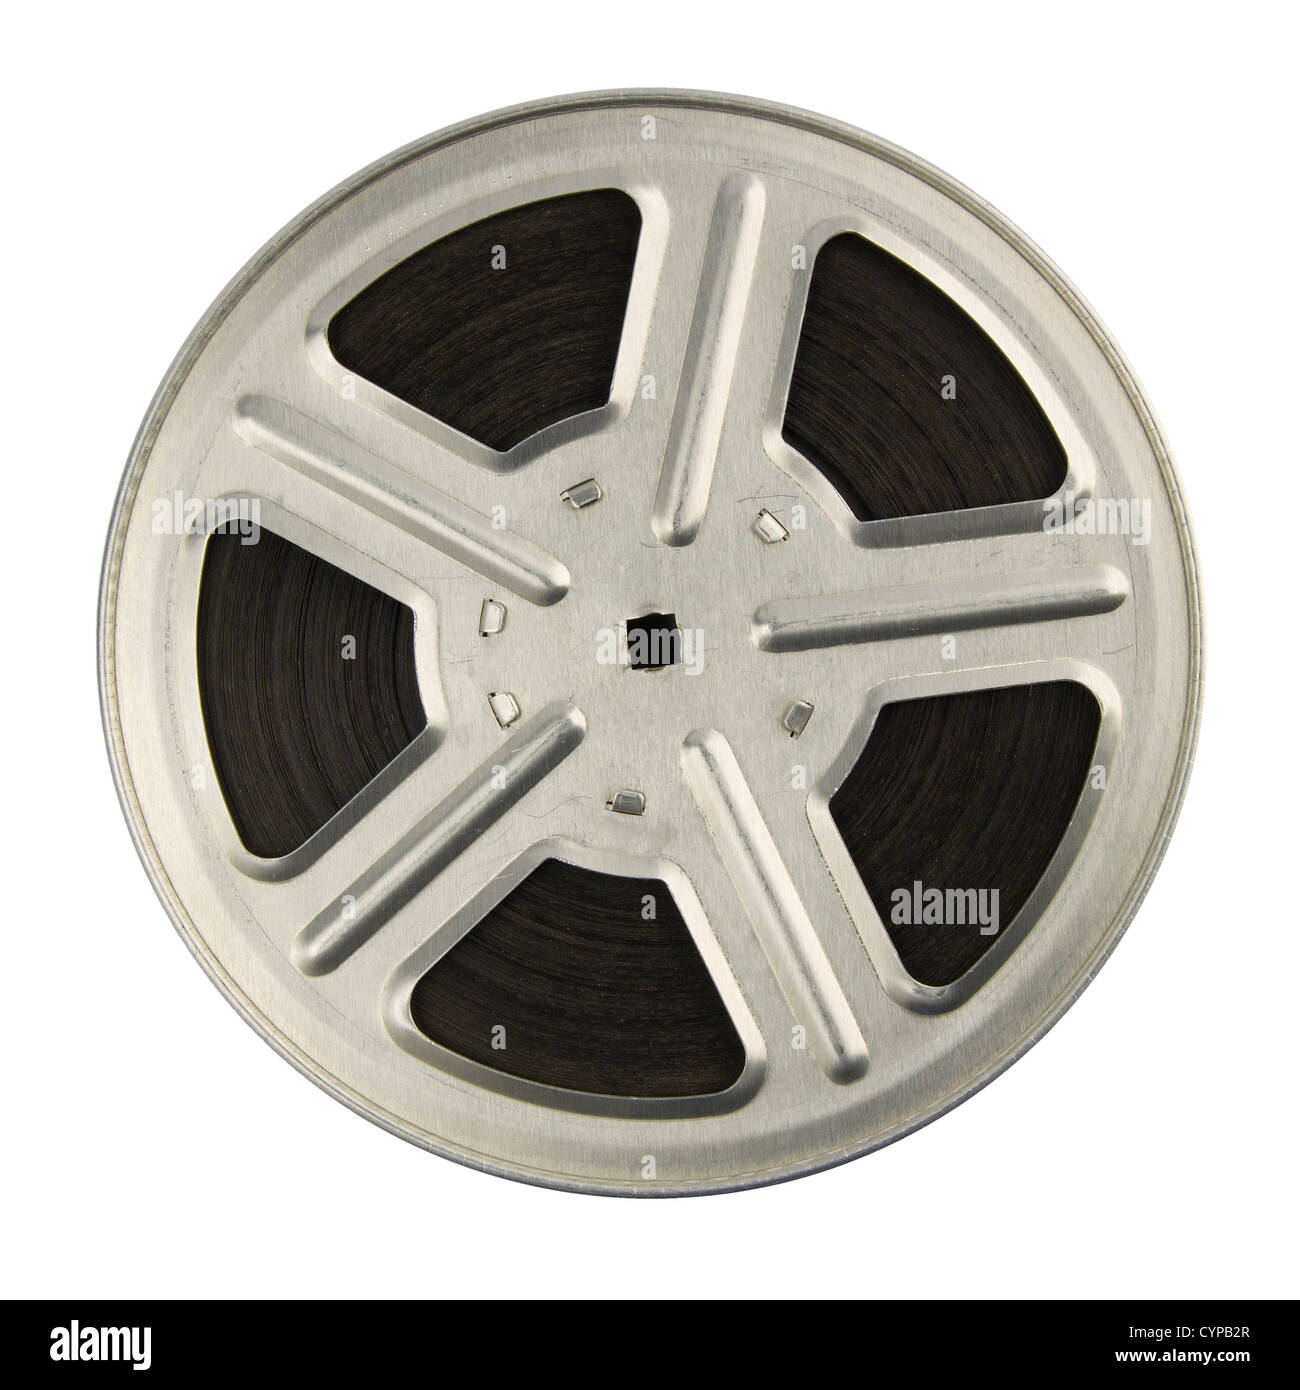 16 mm motion picture film reel, isolated on white background Stock